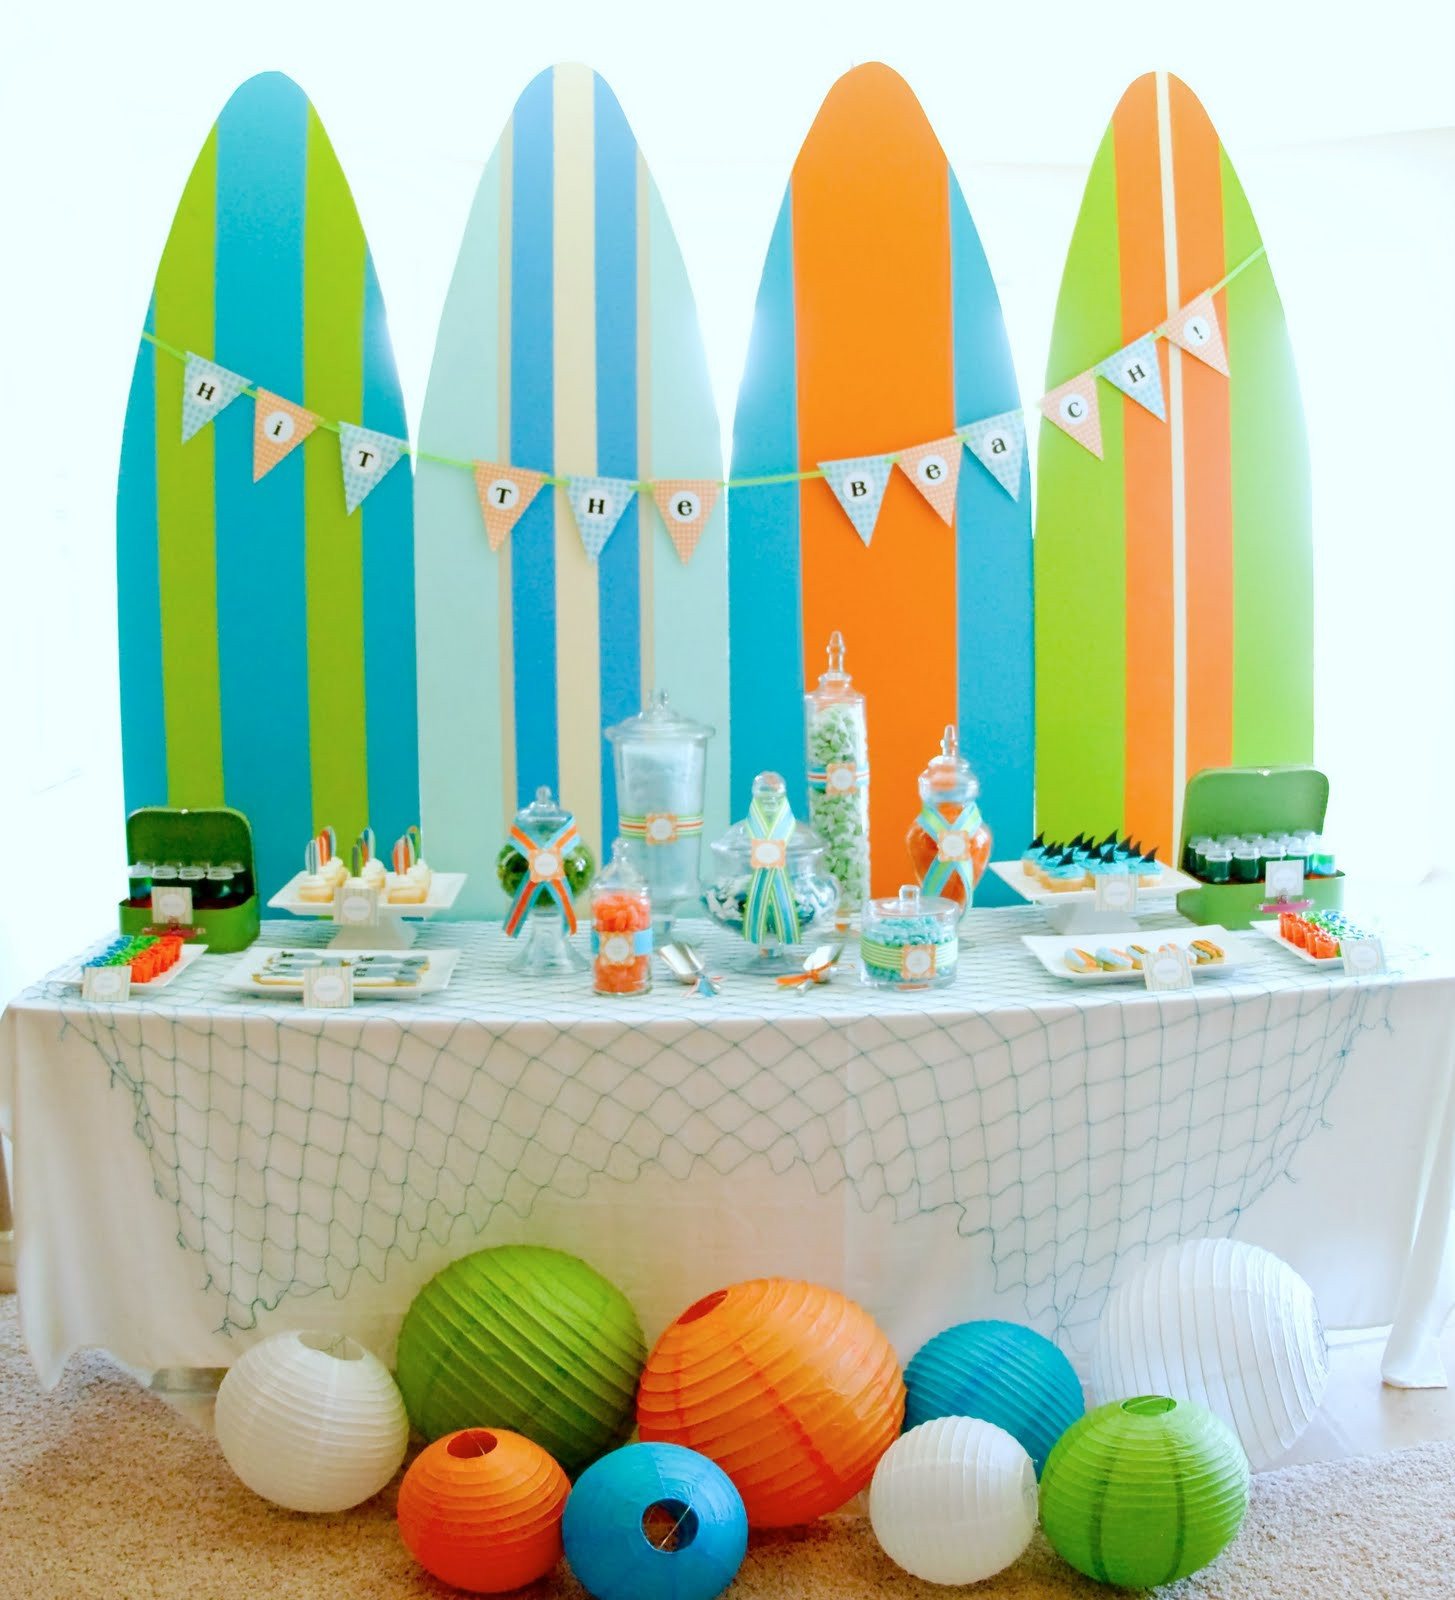 Beach Party Table Decoration Ideas
 Kara s Party Ideas Surf s Up Summer Pool Party